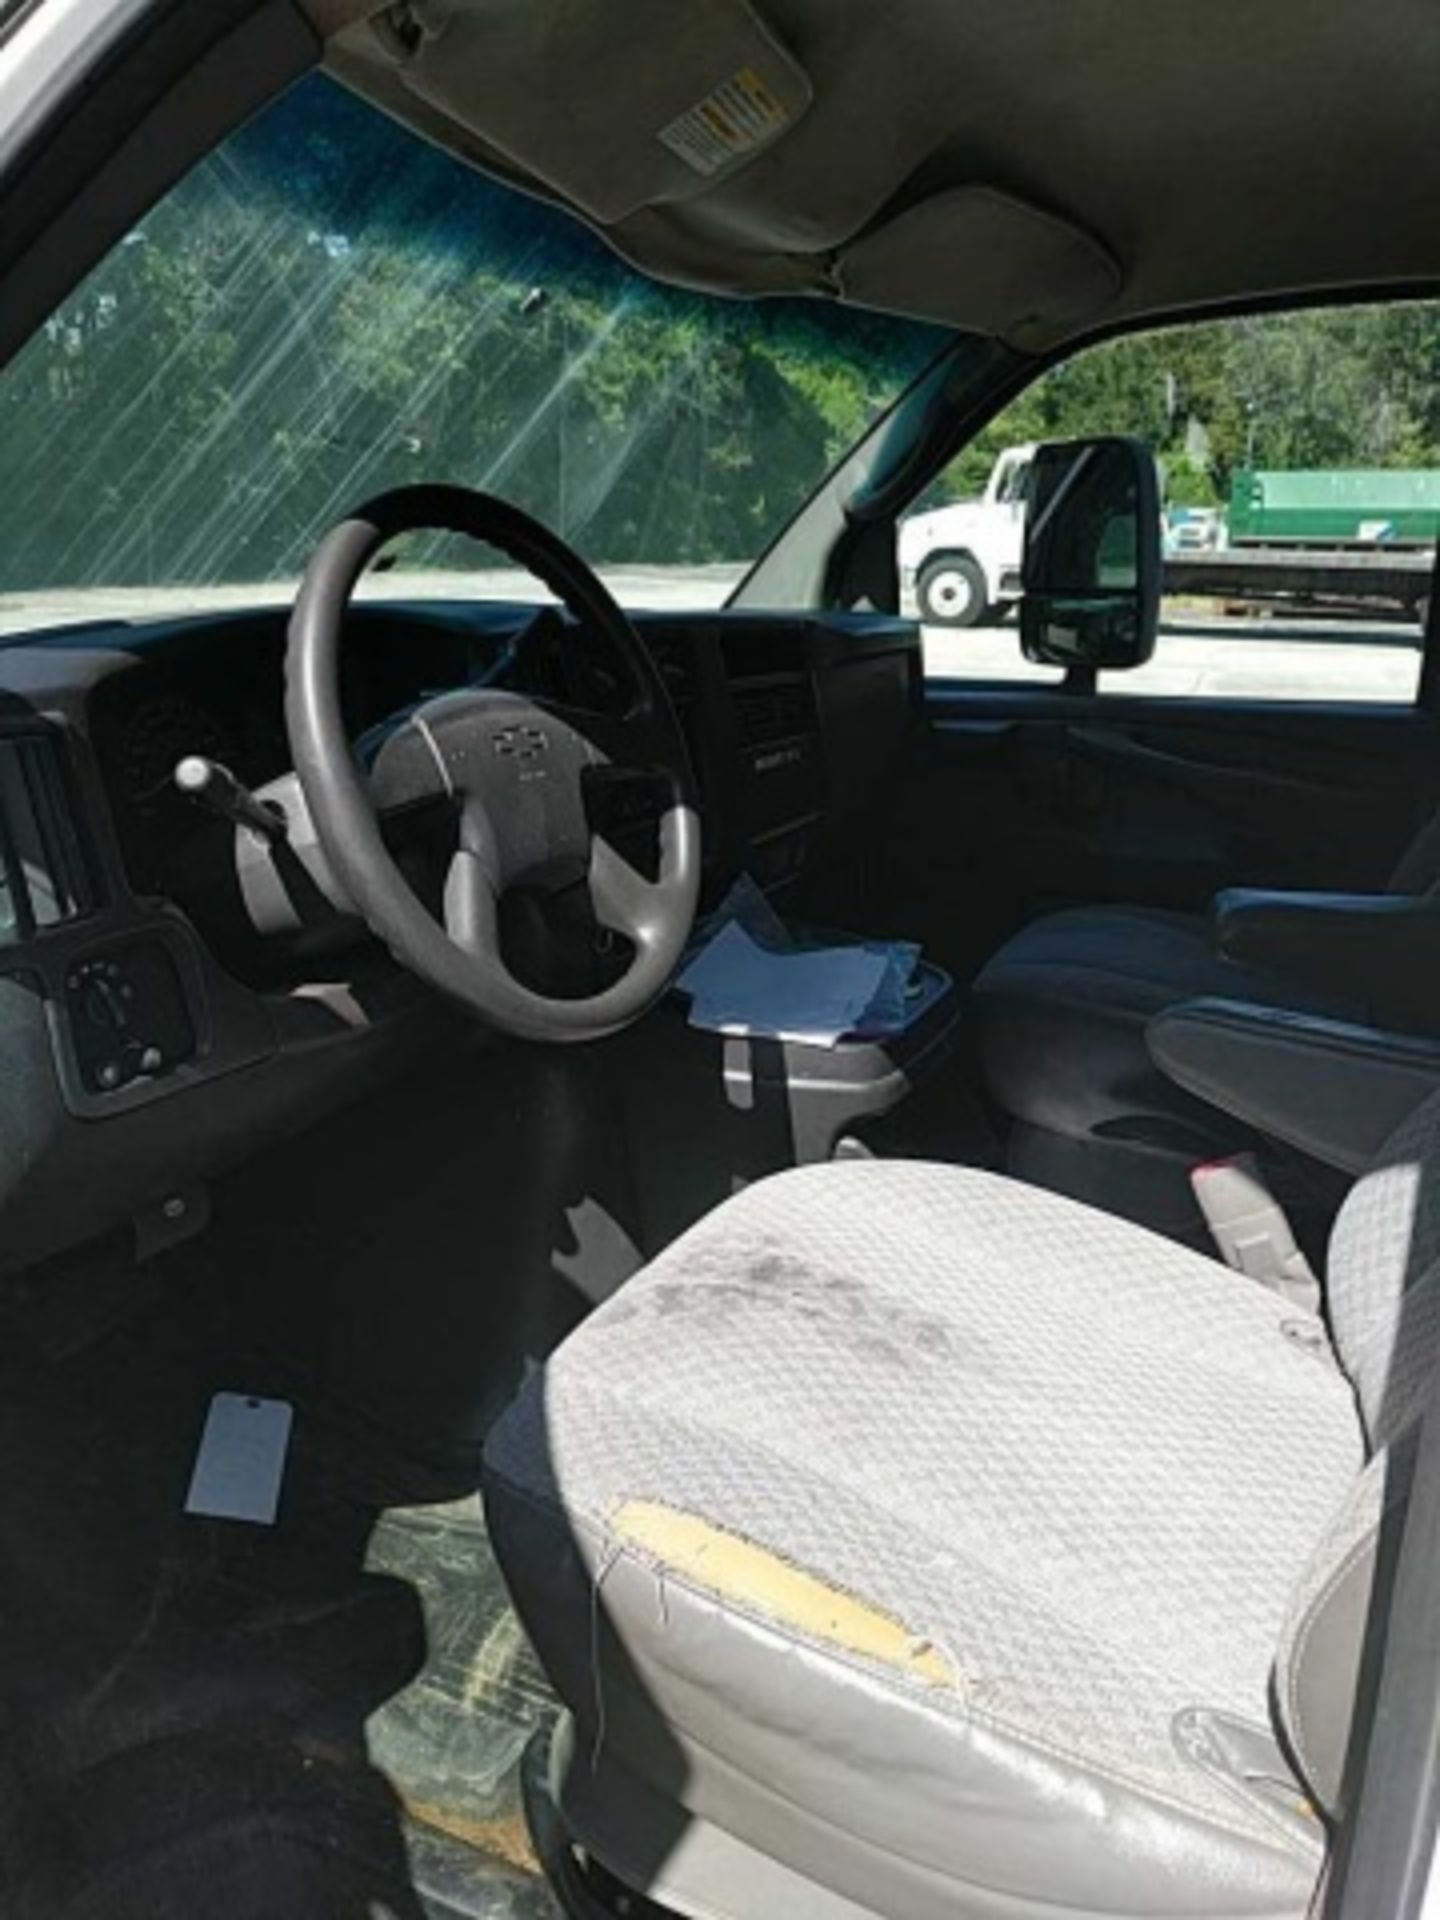 2006 Chevrolet Express 3500 - Image 9 of 15